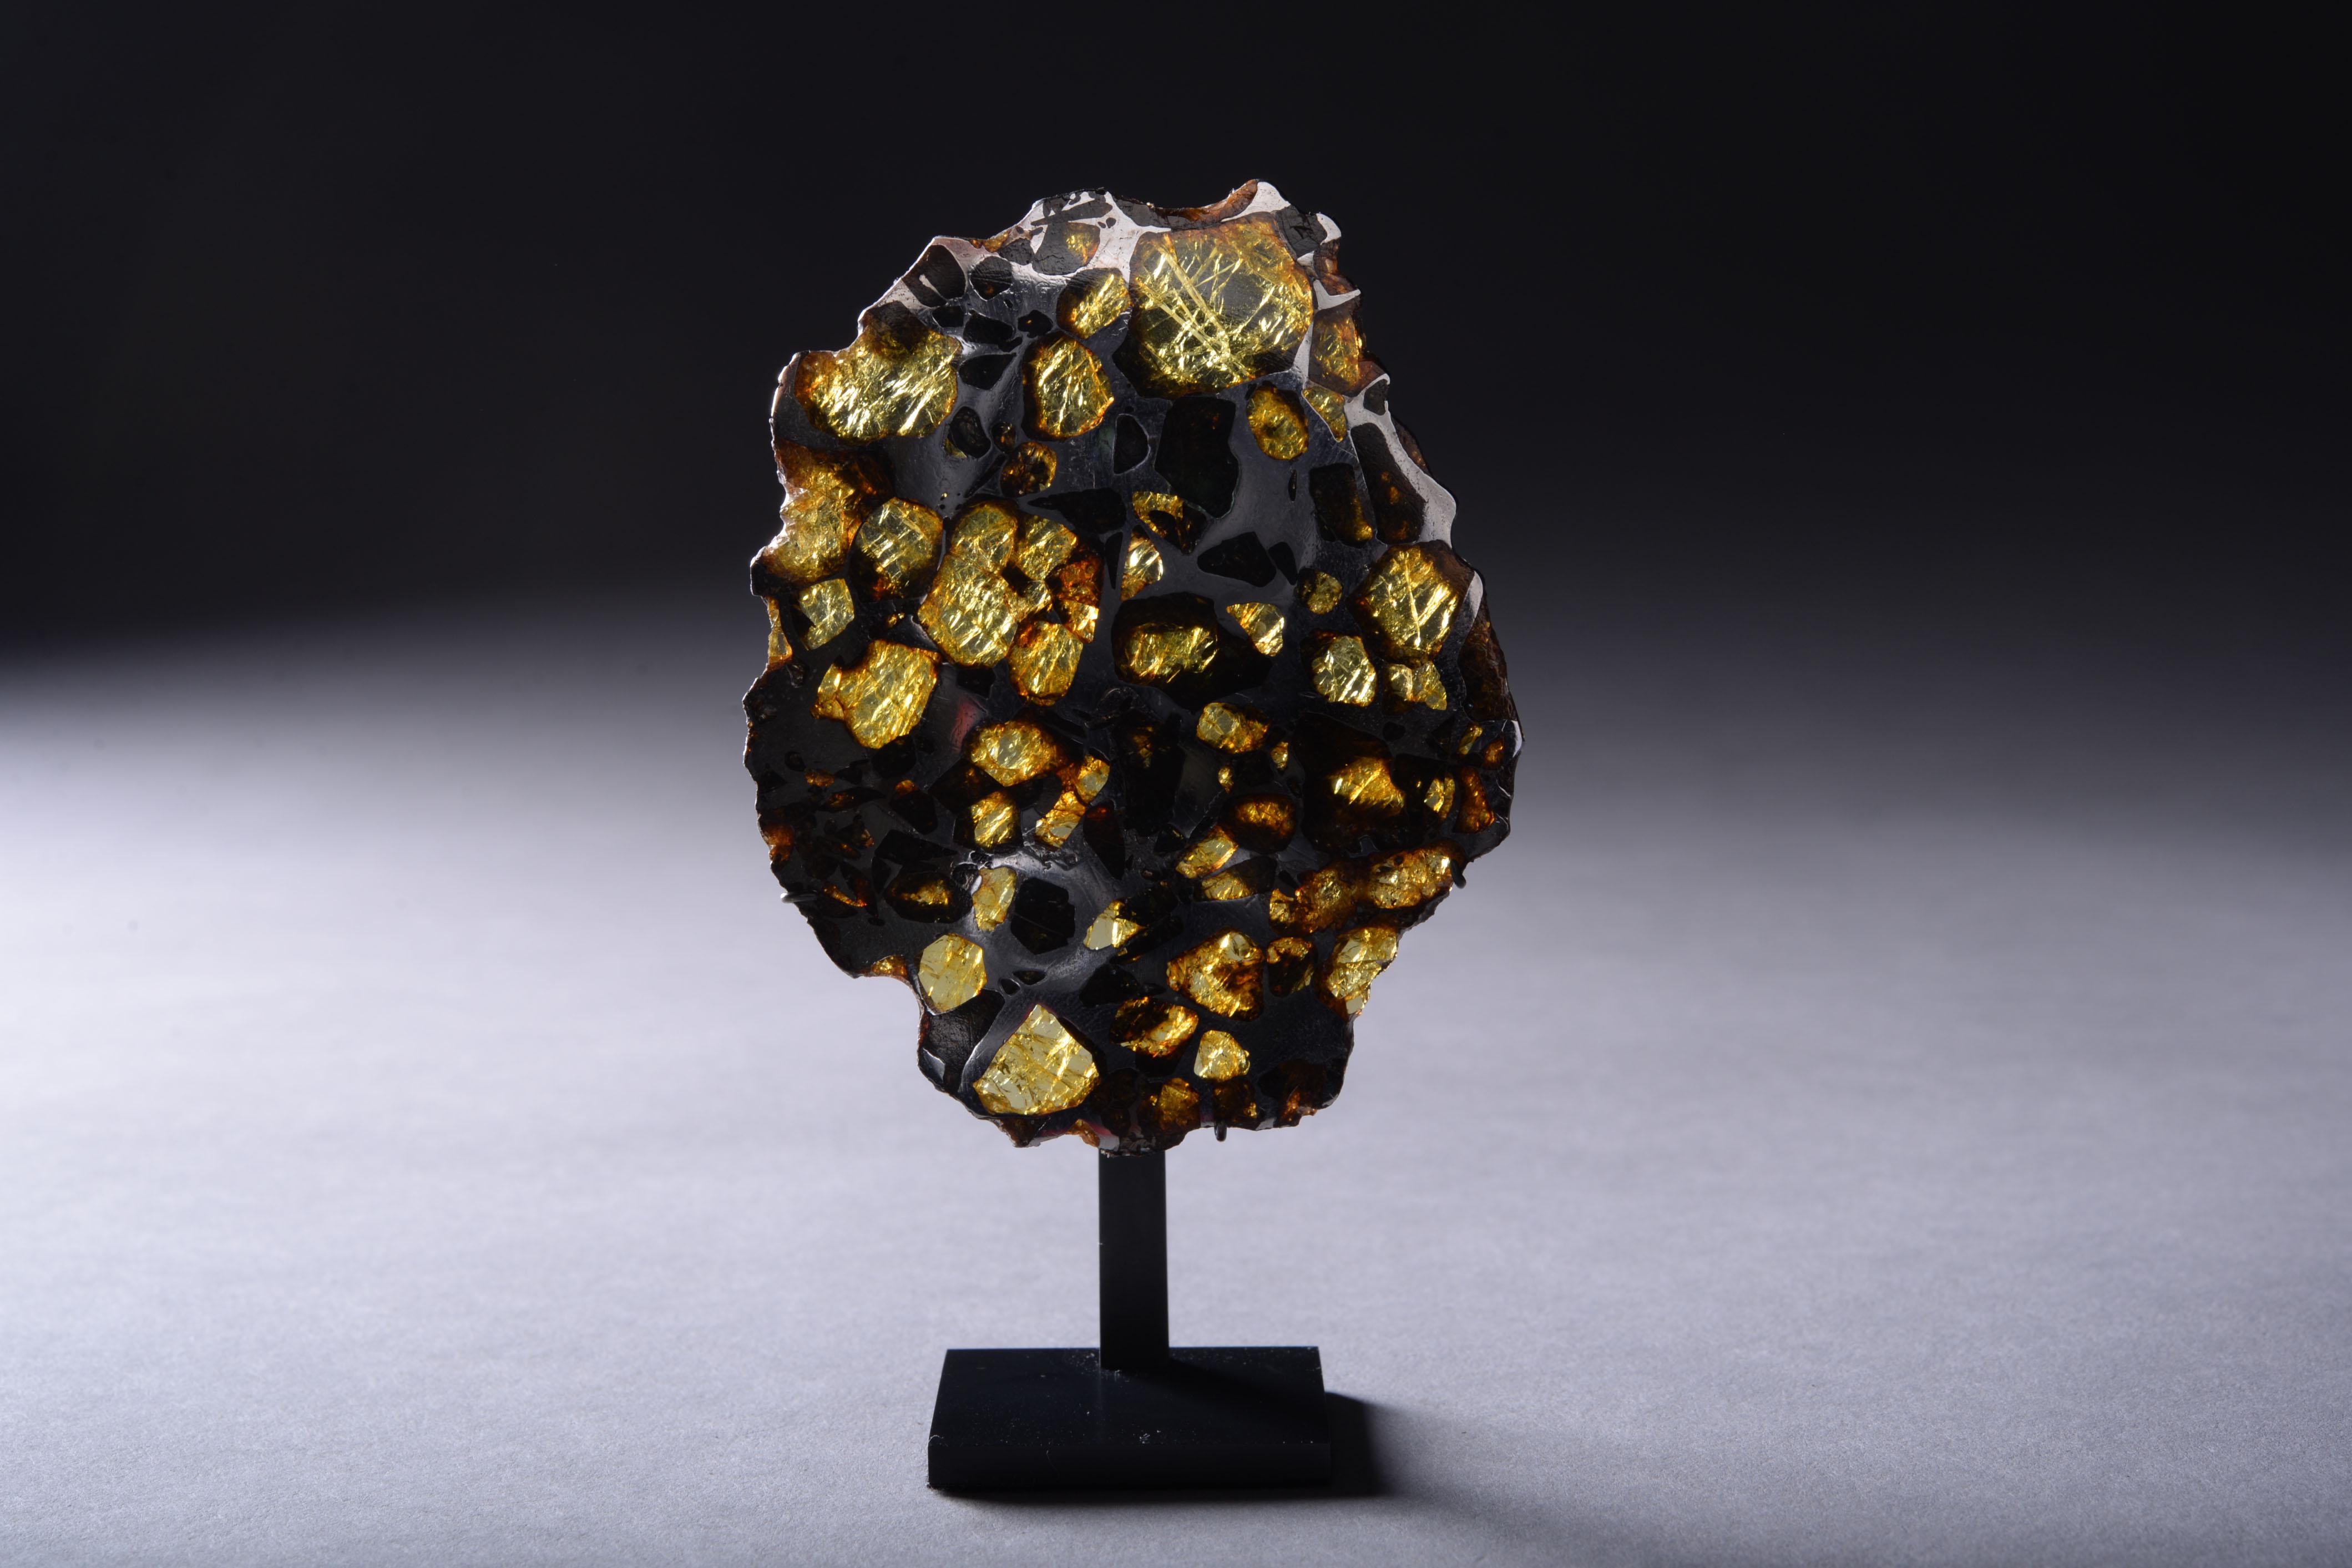 This complete cross-sectional slice from the Imilac meteorite has been prepared to reveal shimmering olivine and peridot gems embedded in an iron-nickel metallic matrix. The magnificent honeycomb pattern shown here is characteristic of pallasite